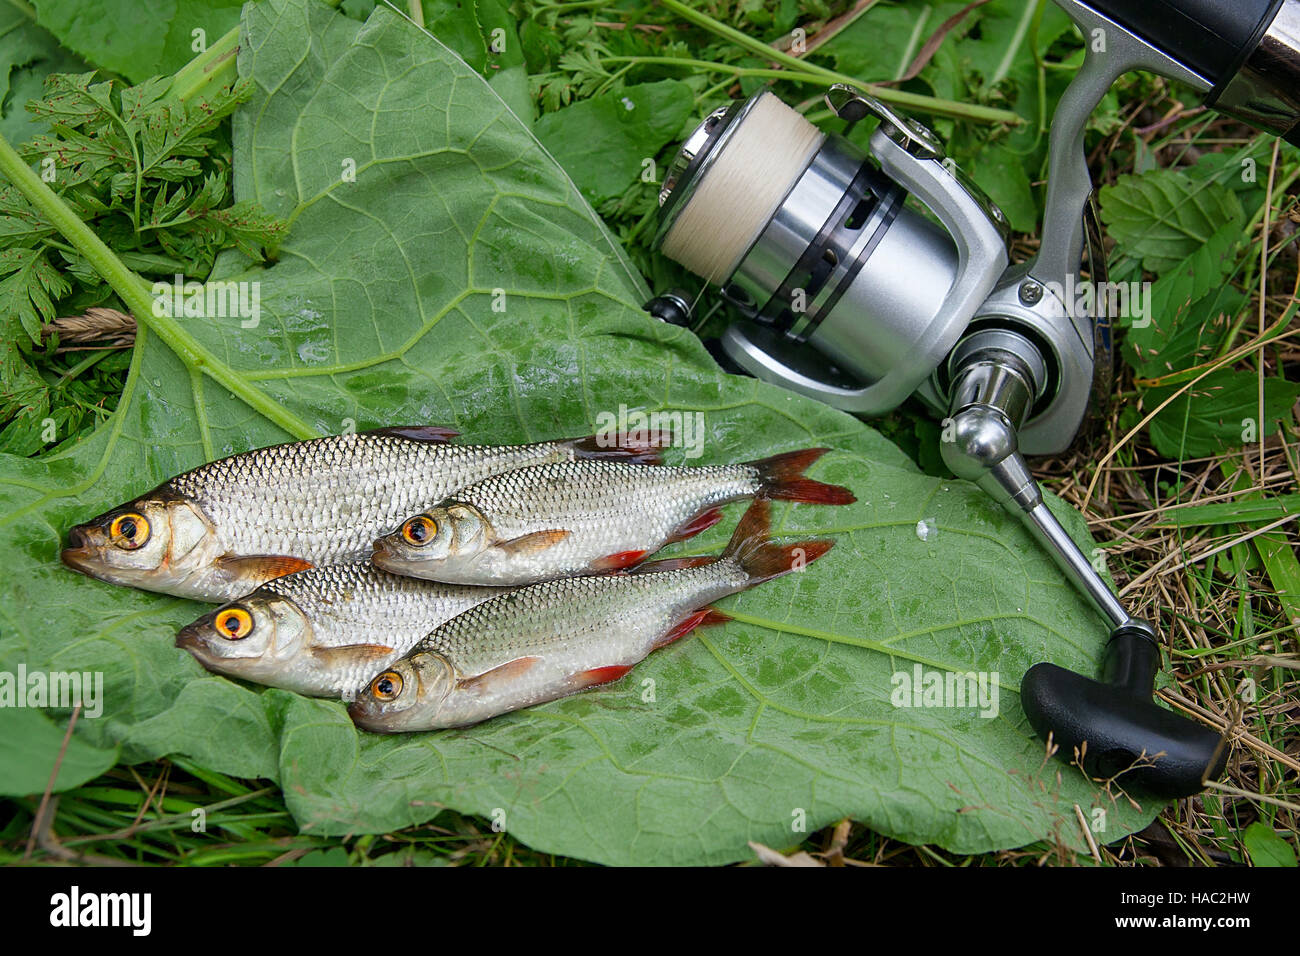 Freshwater fish just taken from the water. Catching freshwater fish and fishing rods with fishing reel. Several common rudd fish and spinning Stock Photo